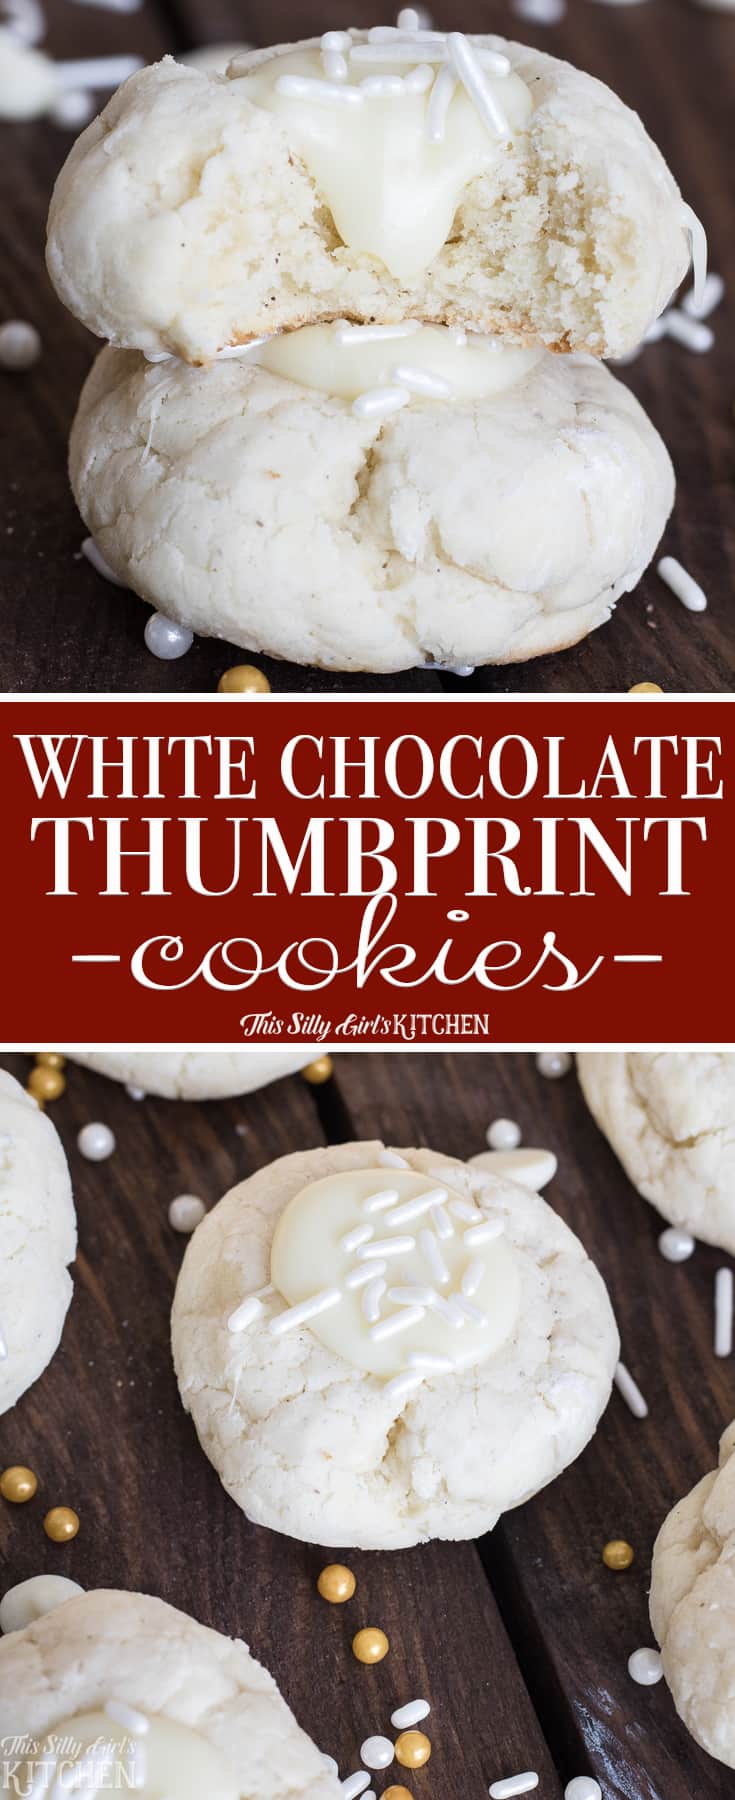 Pinterest image of White Chocolate Thumbprint Cookie Recipe with words in center.